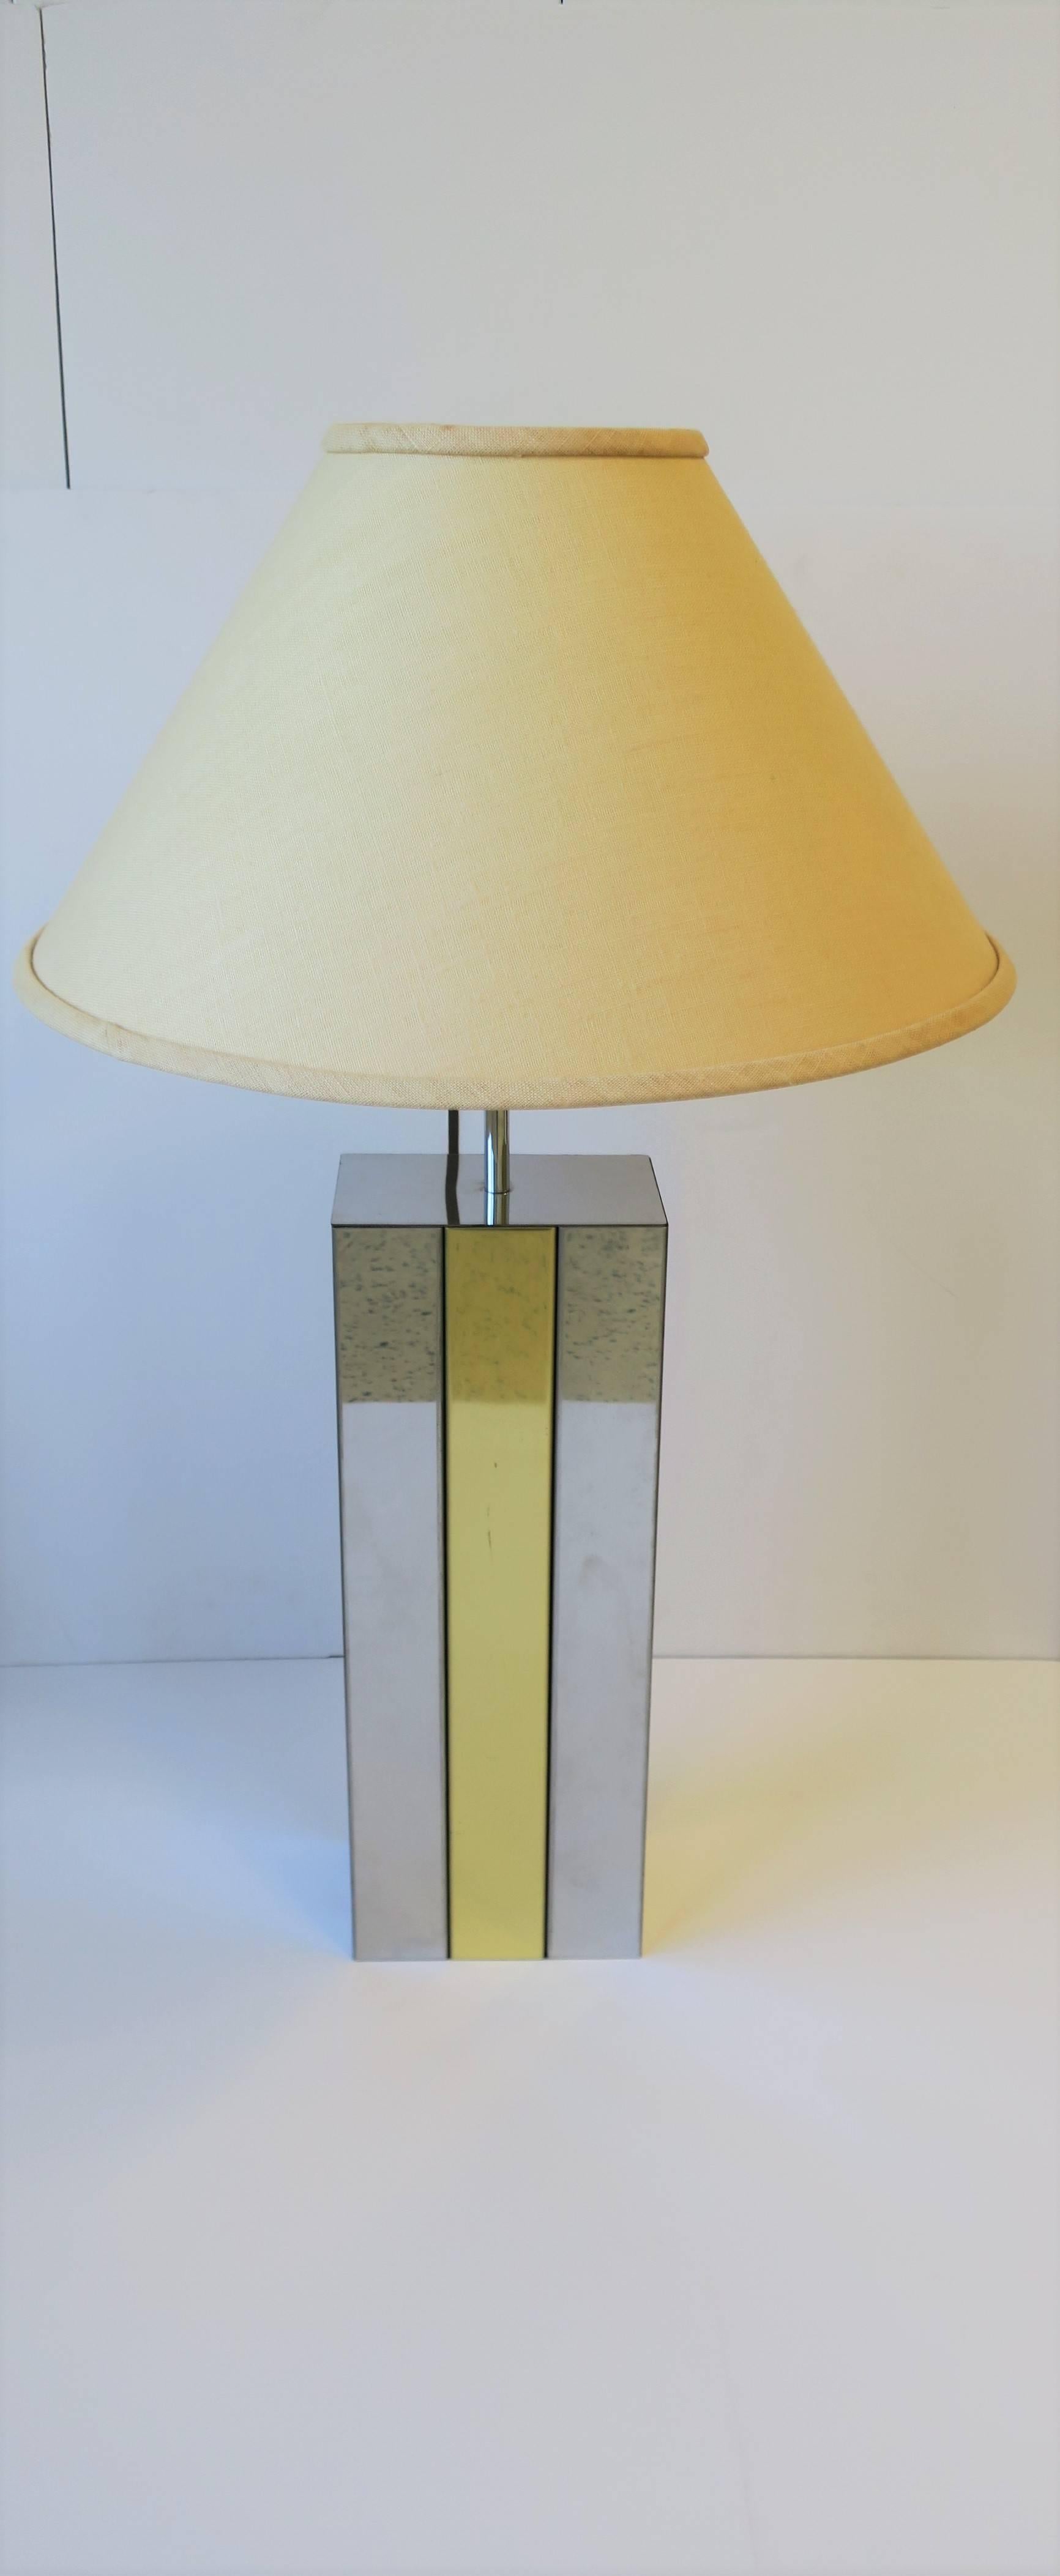 A '70s Modern Robert Sonneman designed rectangular chrome and brass desk or table lamp, circa 1970s. Chrome with brass stripe down front and back; lamp is marked 'Sonneman' on lower back as shown in last image. In fine working order. 

Lamp